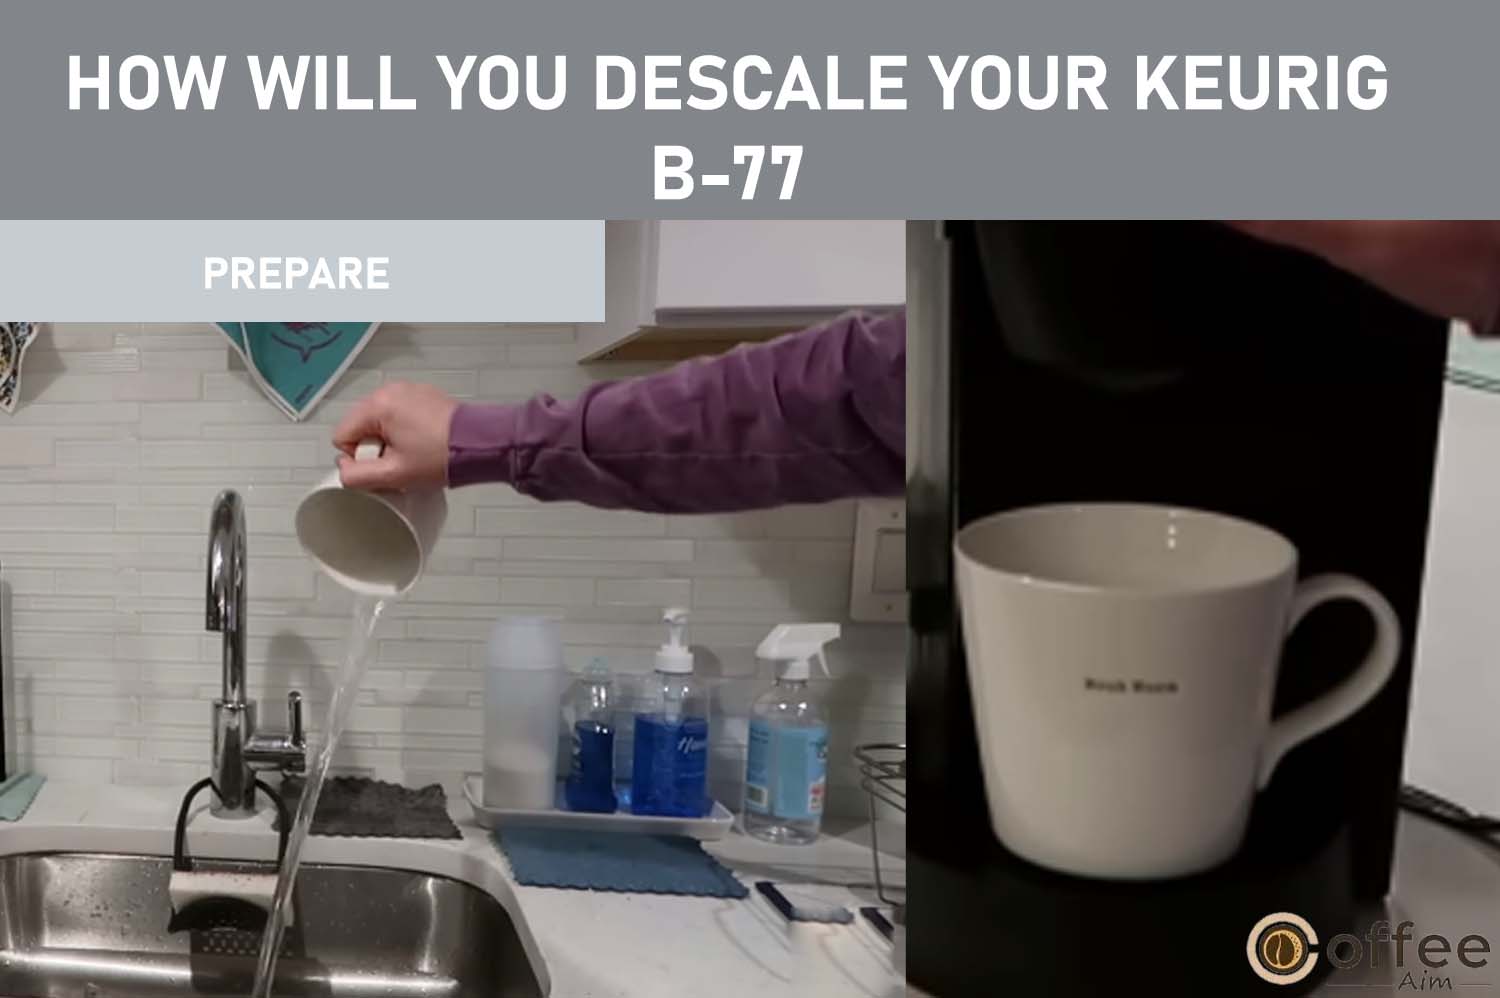 To descale your Brewer, gather 48 fluid ounces of undiluted white vinegar, an empty sink, and a large ceramic mug. Drain the Water Reservoir and deactivate the "Auto-Off" function.